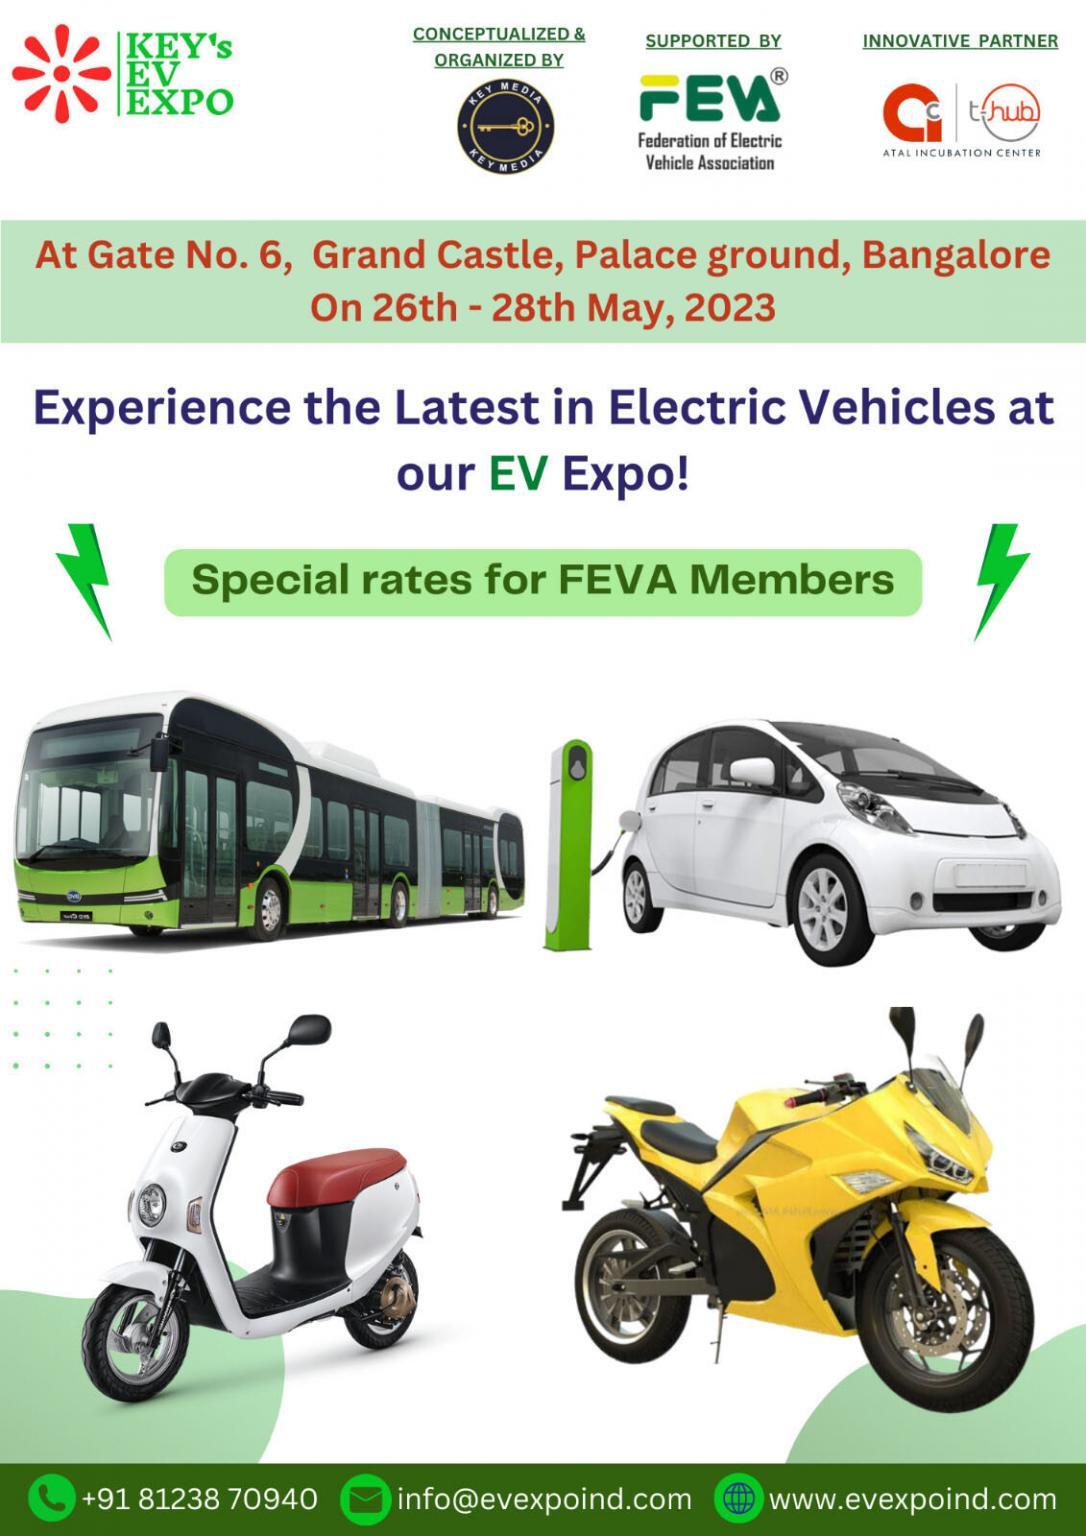 IFIA Bharat's partnership with the 4th edition of the EV Expo, India